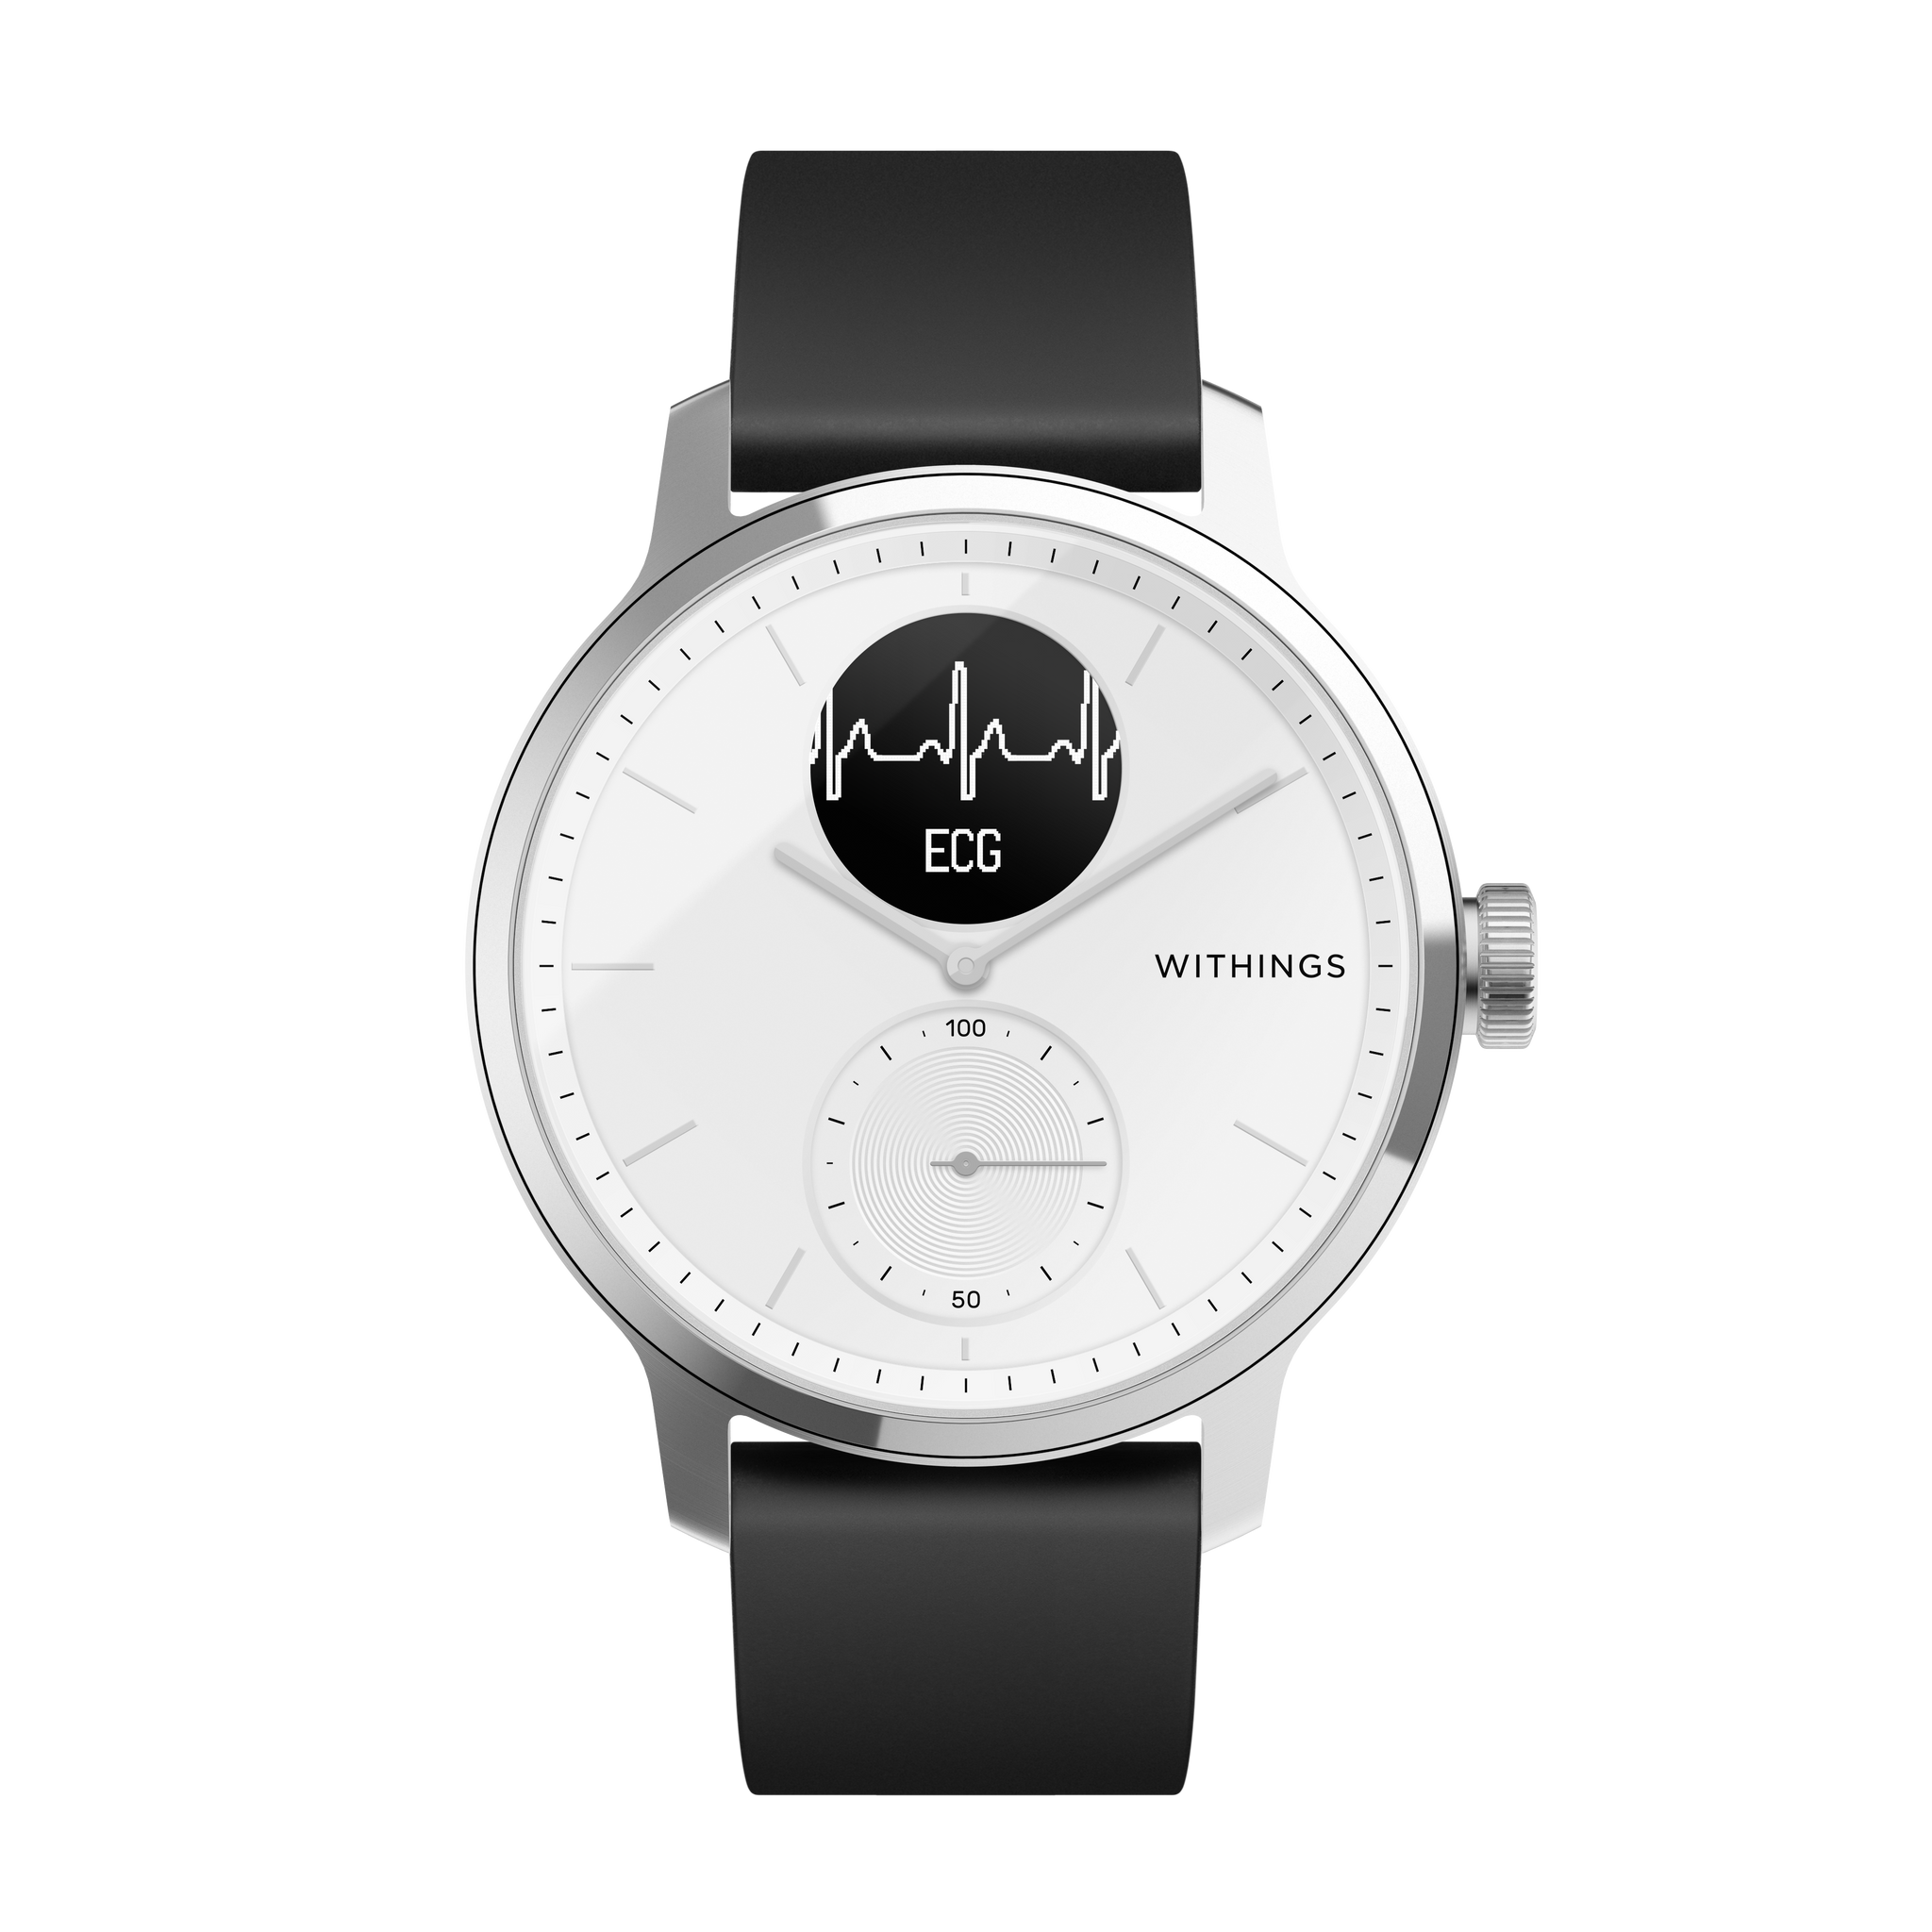 Withings ScanWatch - Hybrid Smartwatch with ECG, Heart Rate & Oximeter (White 42mm)